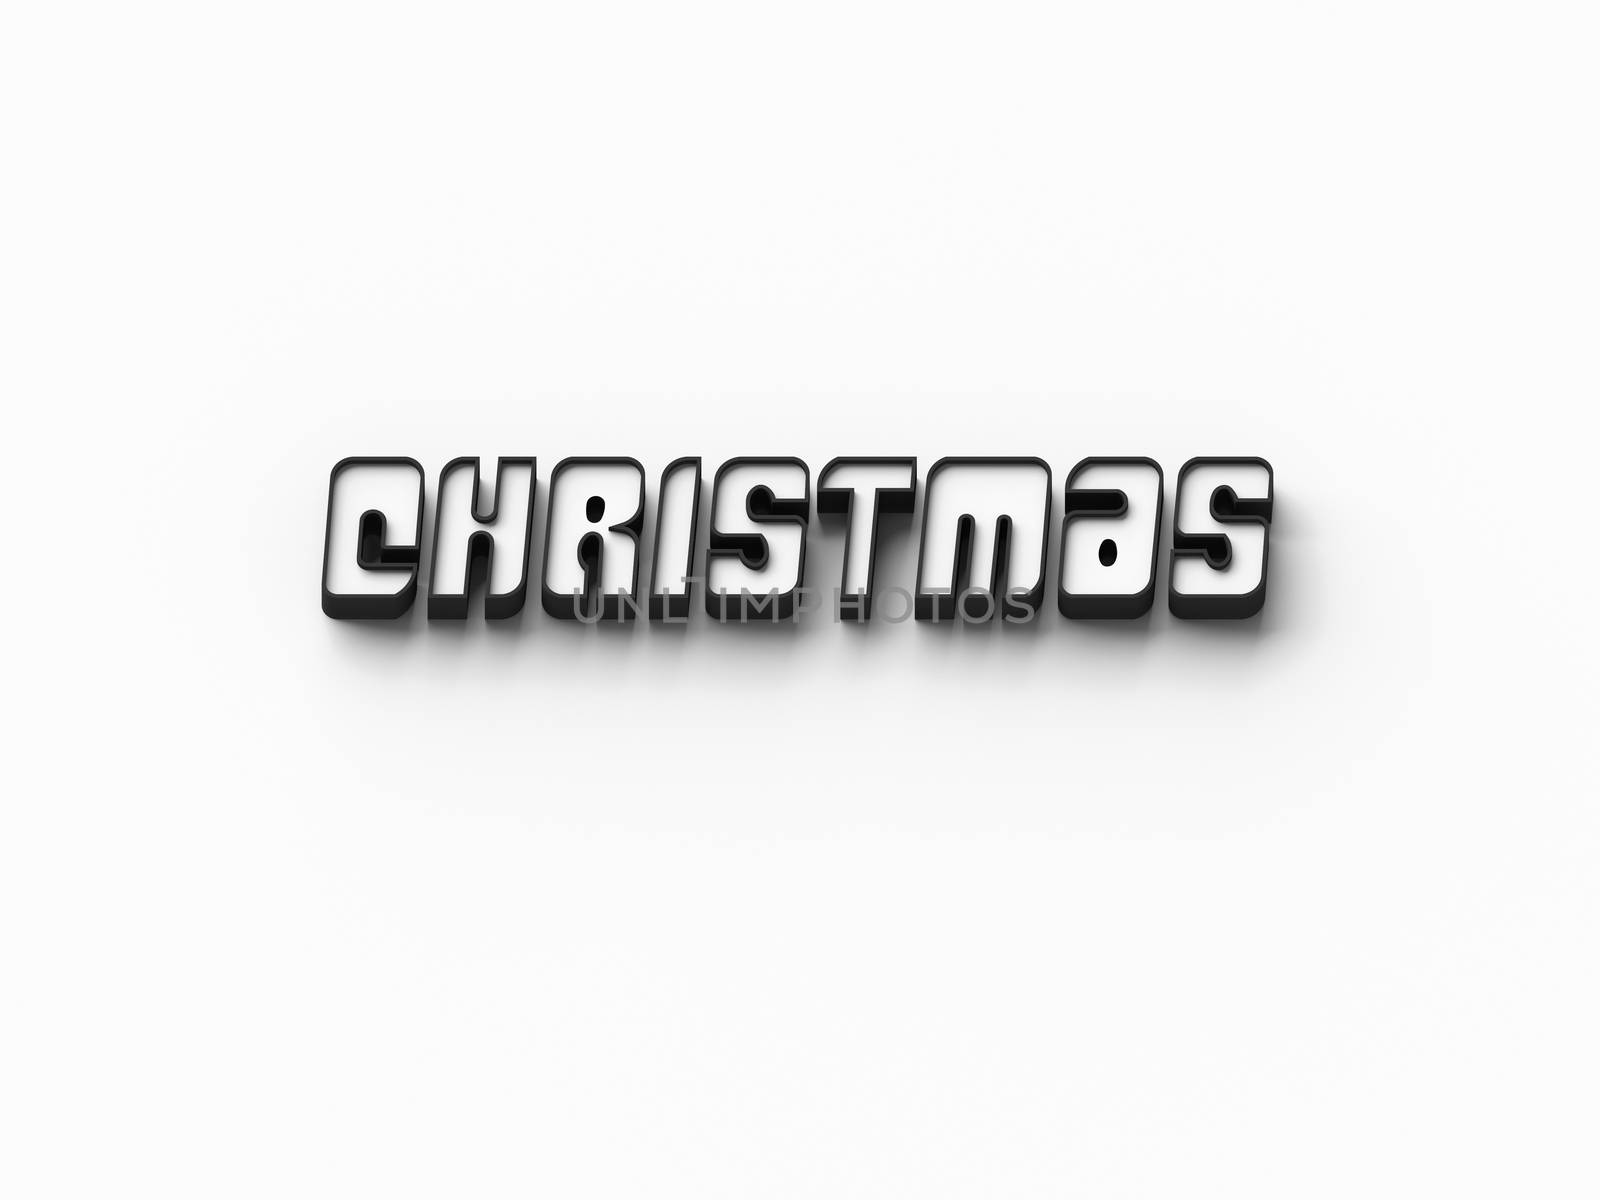 3D RENDERING WORDS 'CHRISTMAS' ON PLAIN BACKGROUND by PrettyTG